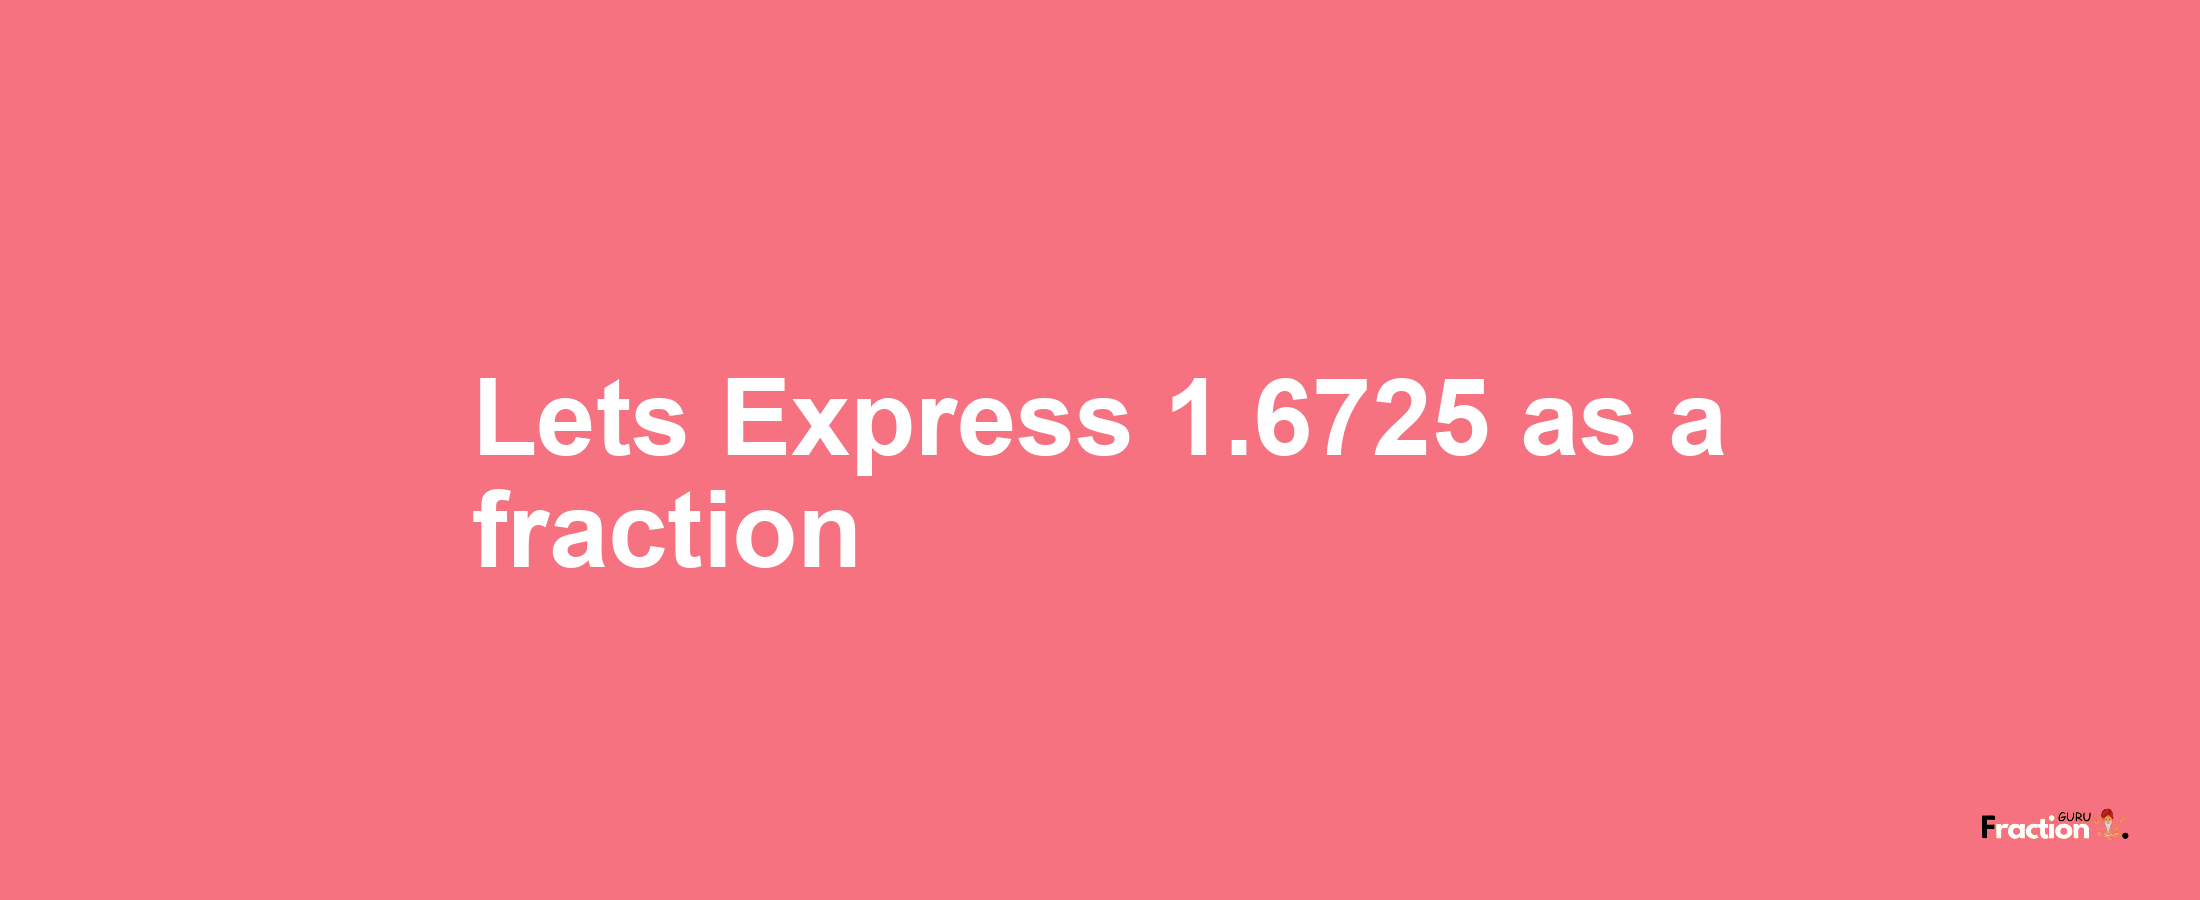 Lets Express 1.6725 as afraction